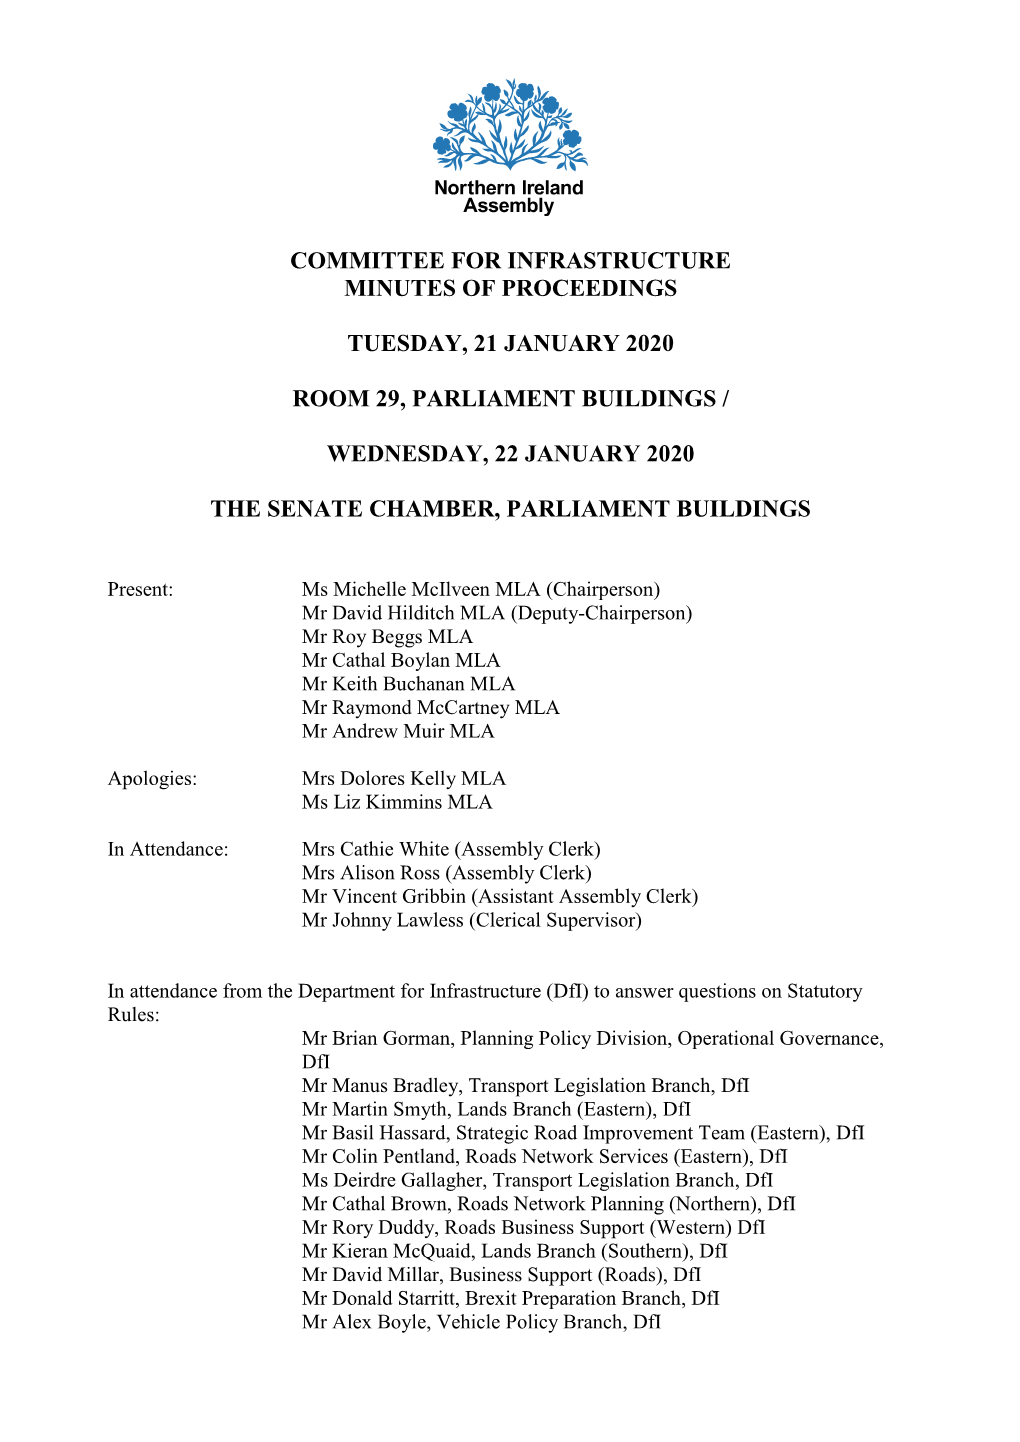 Committee for Infrastructure Minutes of Proceedings Tuesday, 21 January 2020 Room 29, Parliament Buildings / Wednesday, 22 Janu